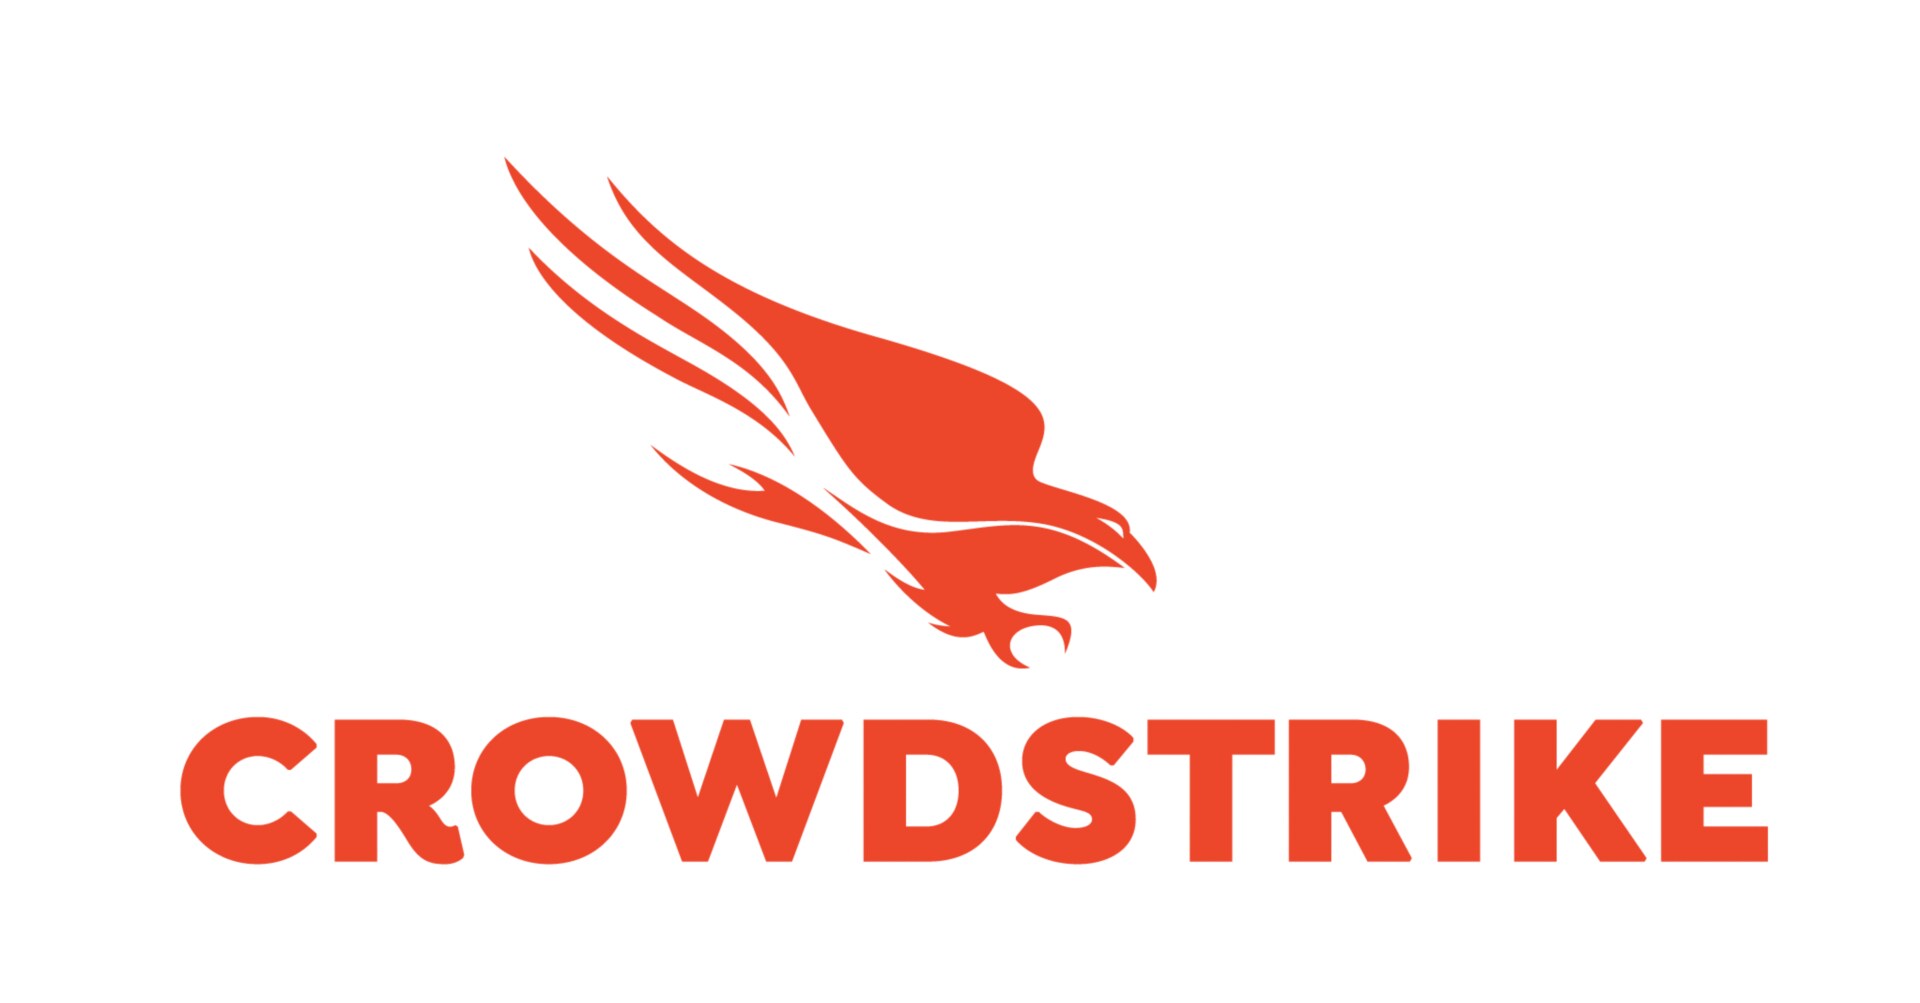 CrowdStrike Falcon Overwatch Service (2,000-2,499 Licenses)